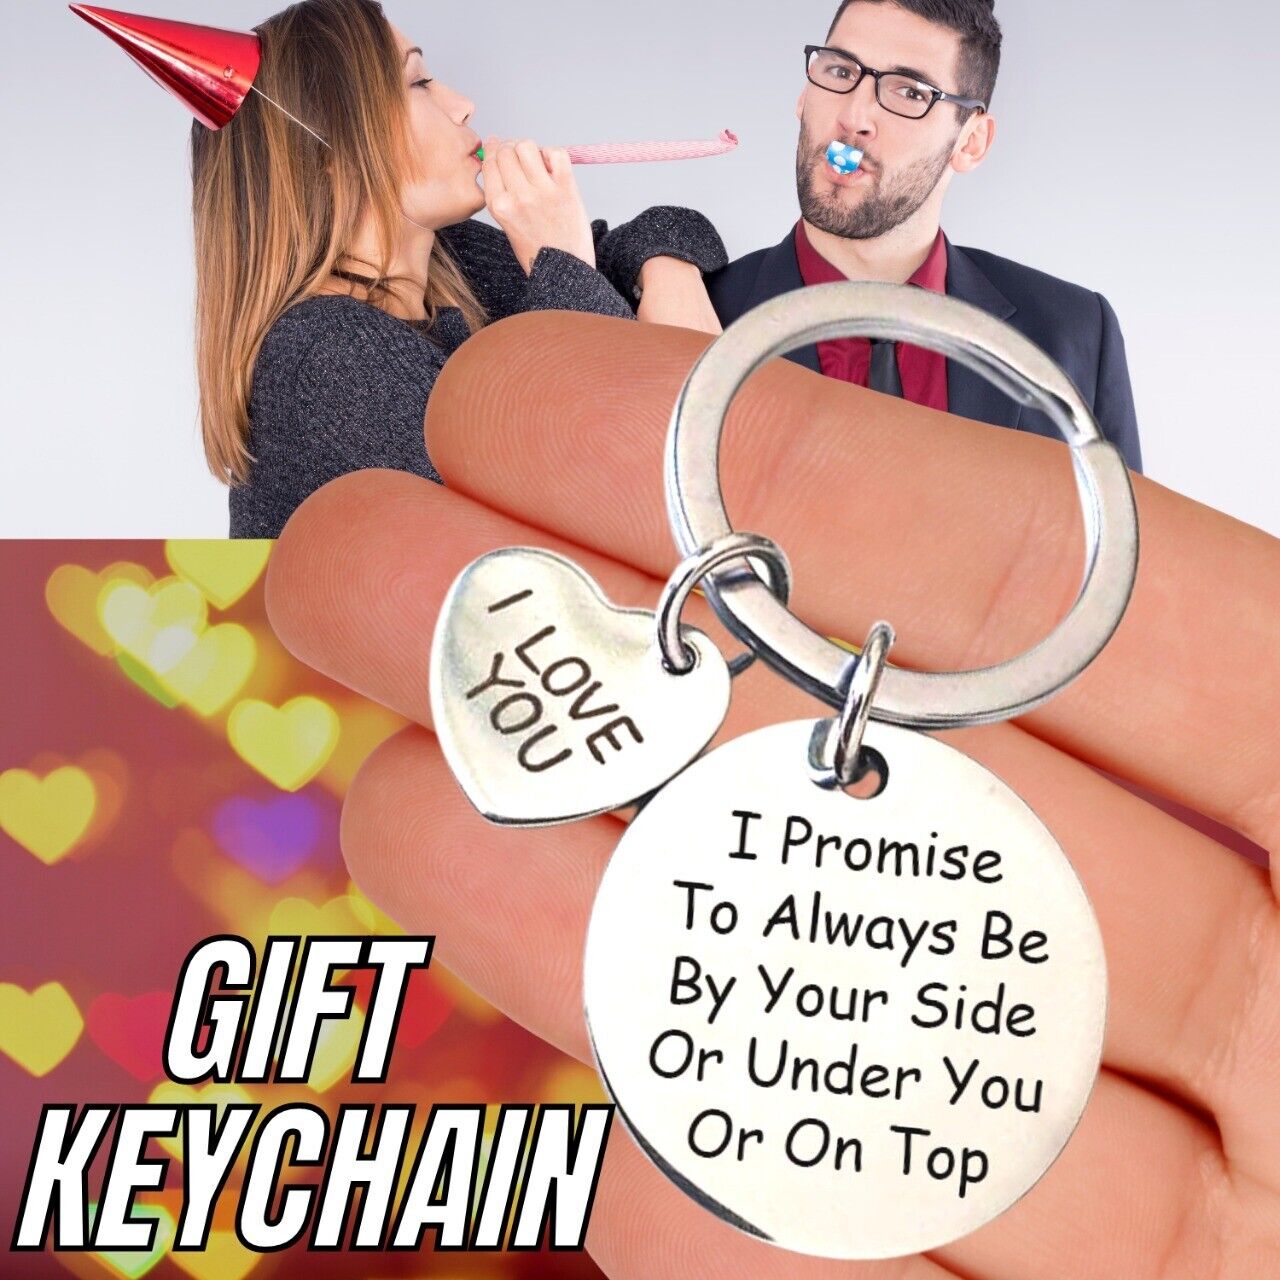 Funny Sexy Dirty Keychain Gift For Her Girlfriend Wife Love Key Ring Tag Couple